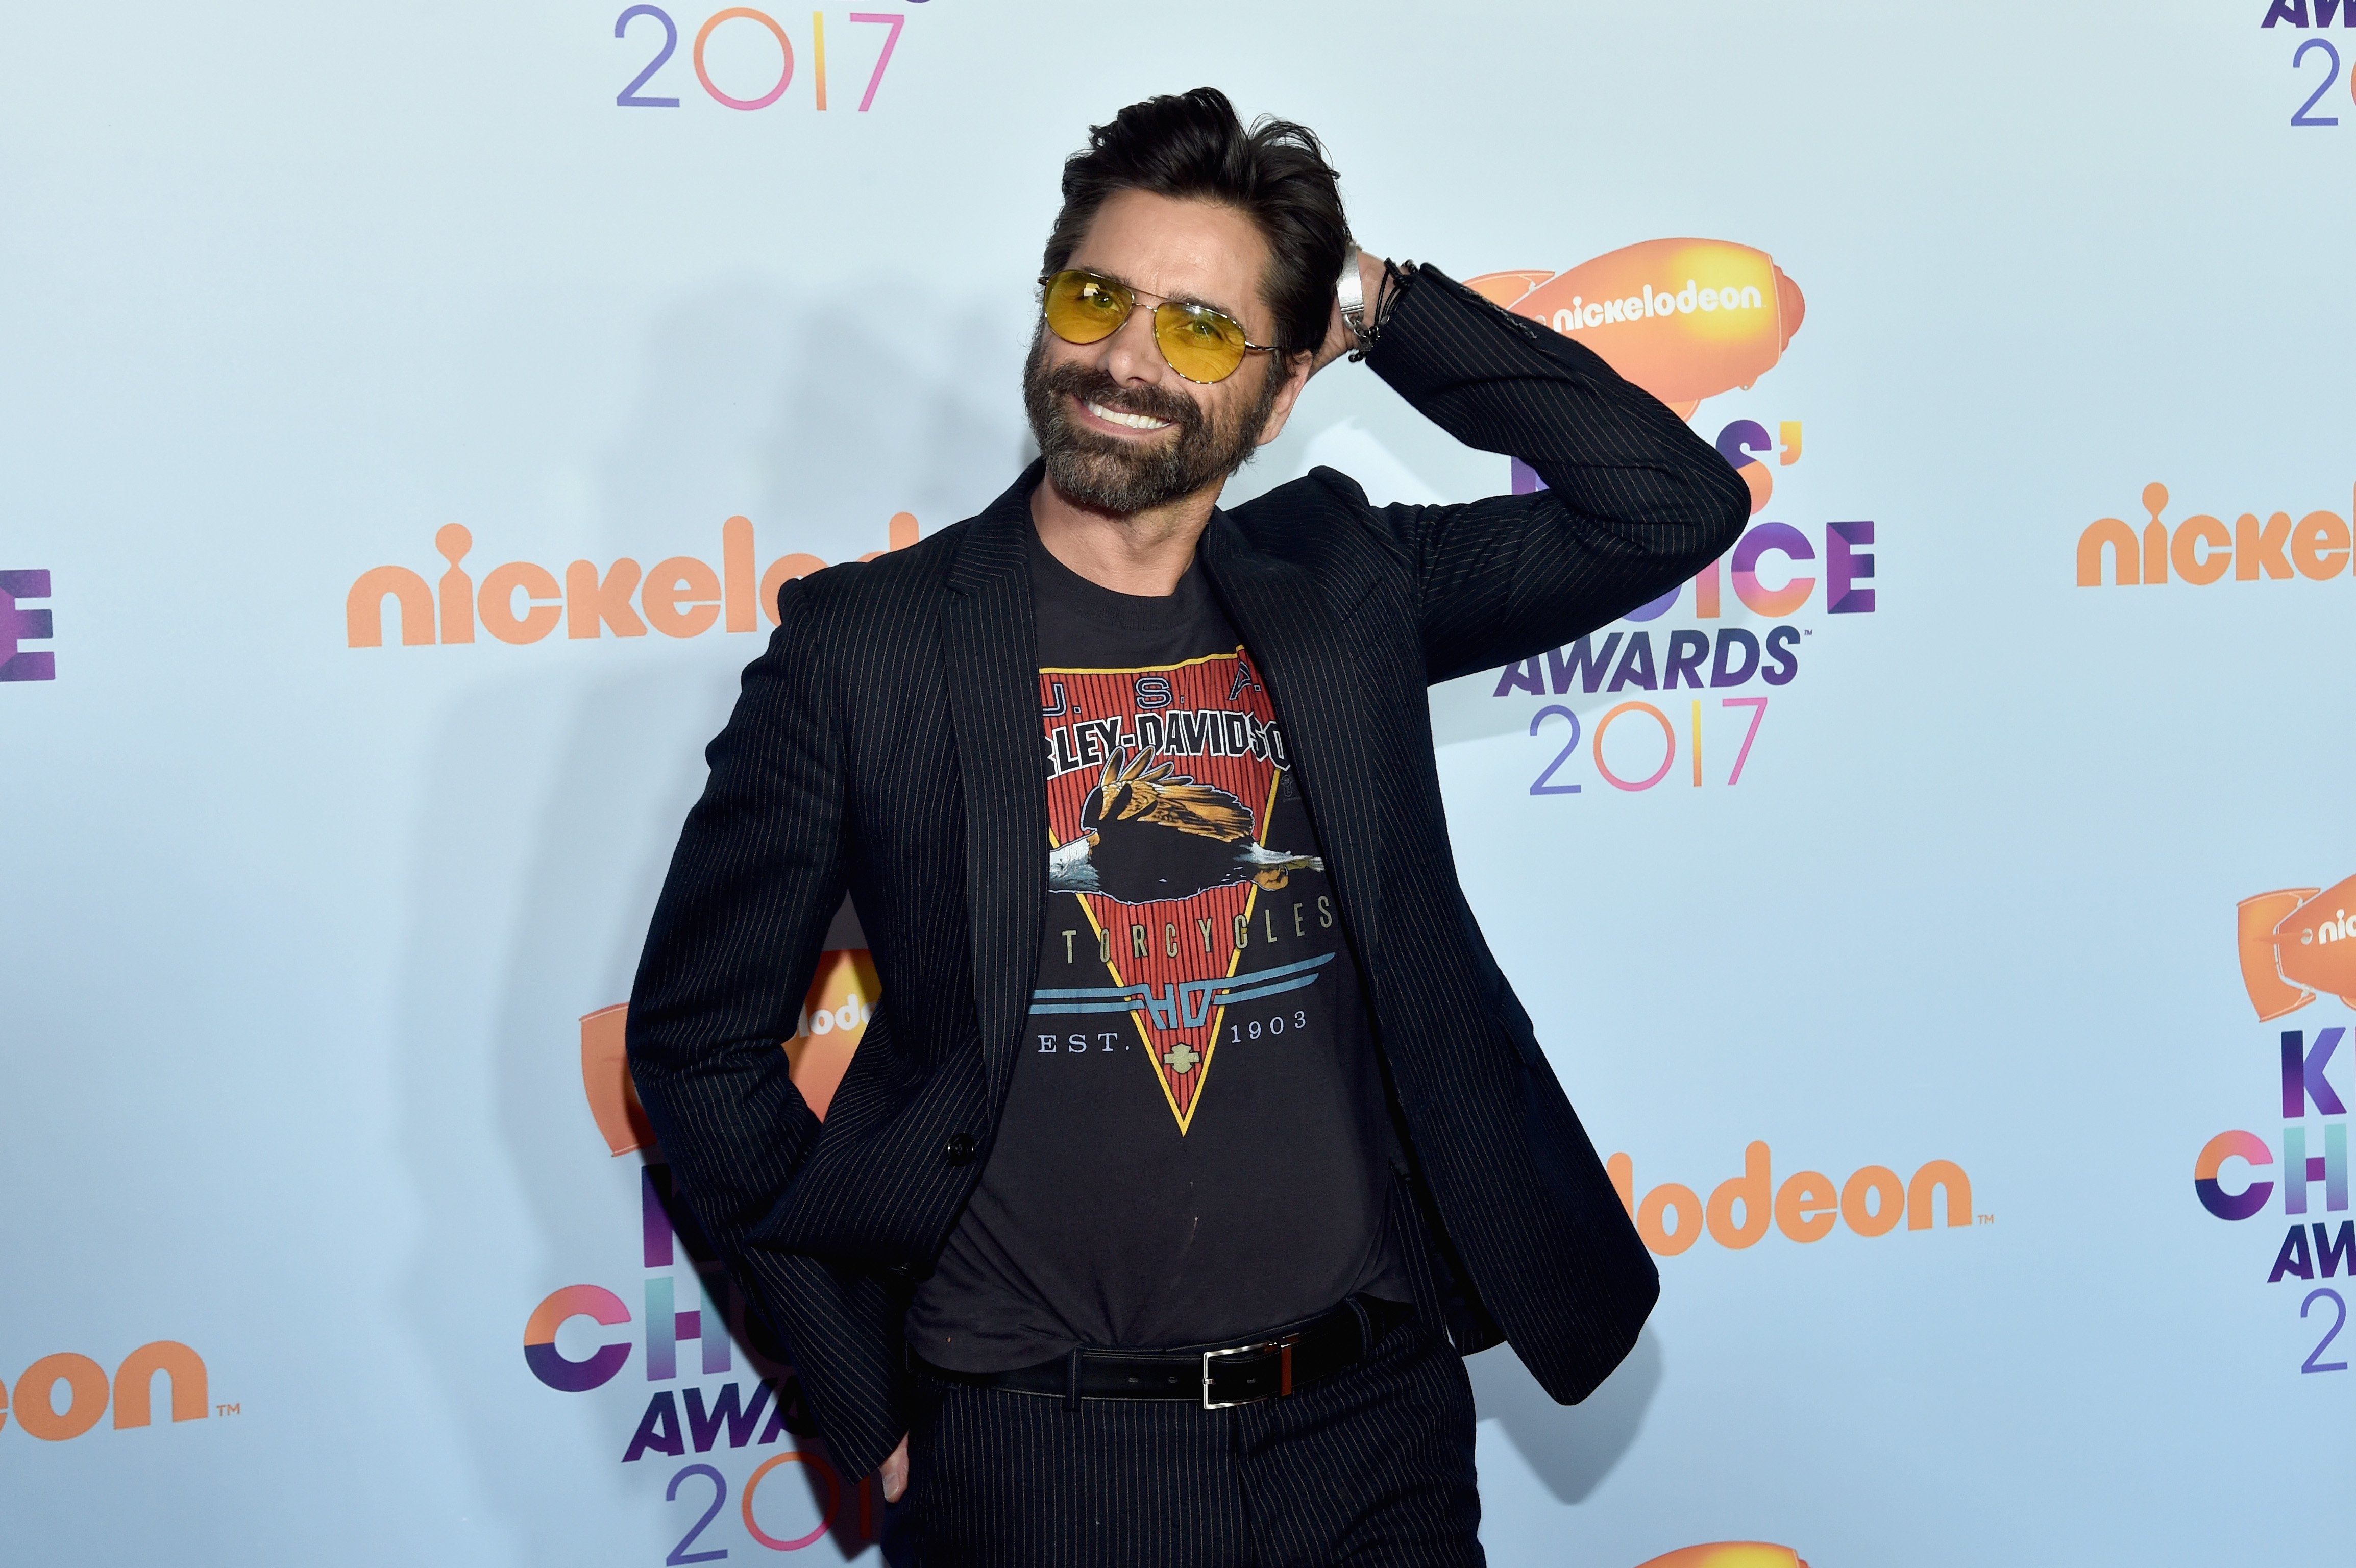  Actor John Stamos at Nickelodeon's 2017 Kids' Choice Awards at USC Galen Center on March 11, 2017| Photo: Getty Images